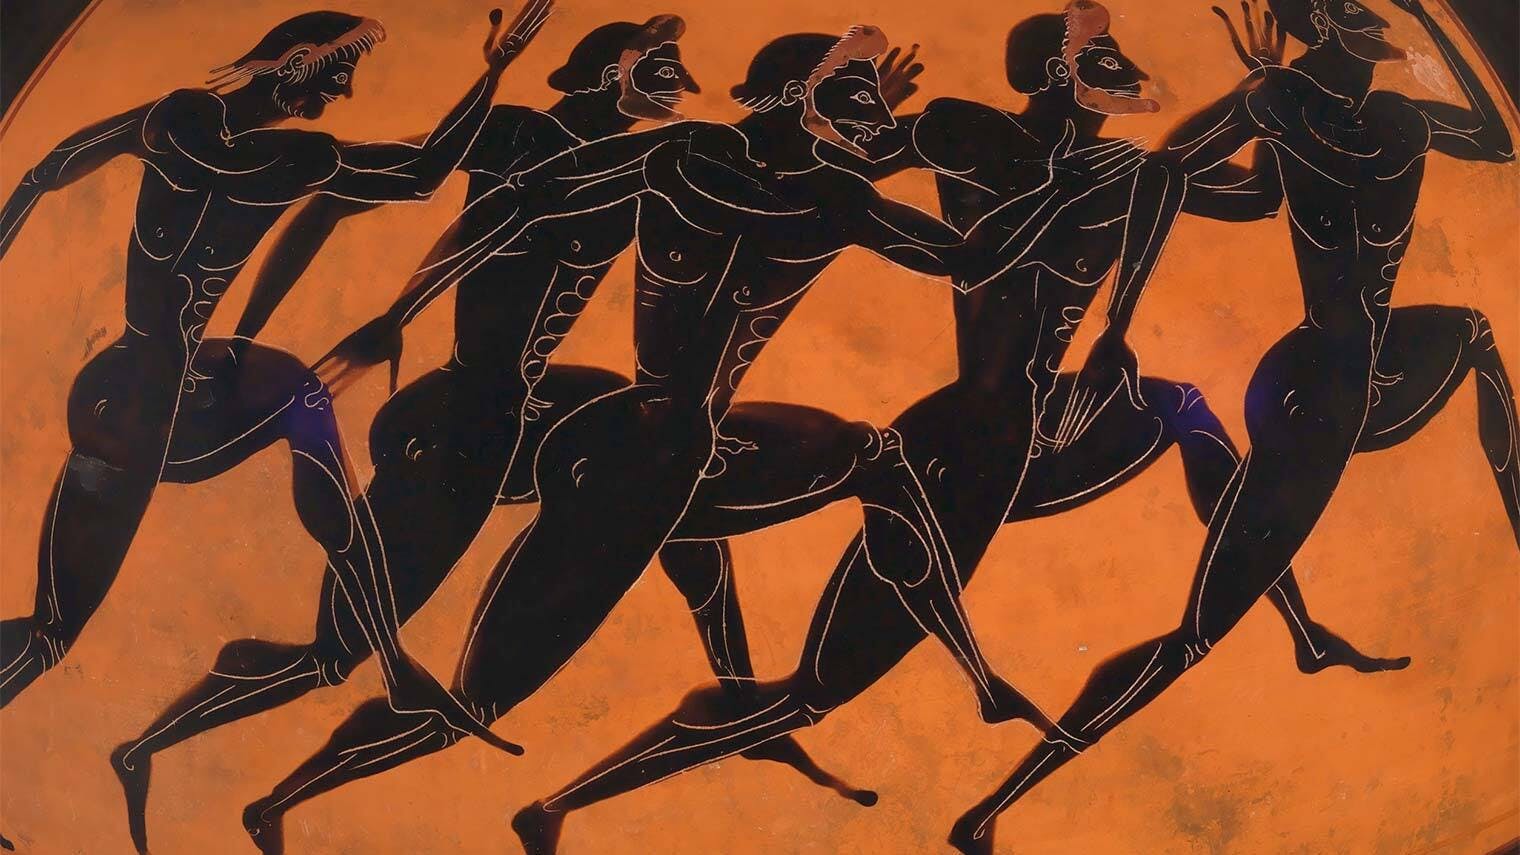 Ancient athletes race on foot in this pottery illustration.